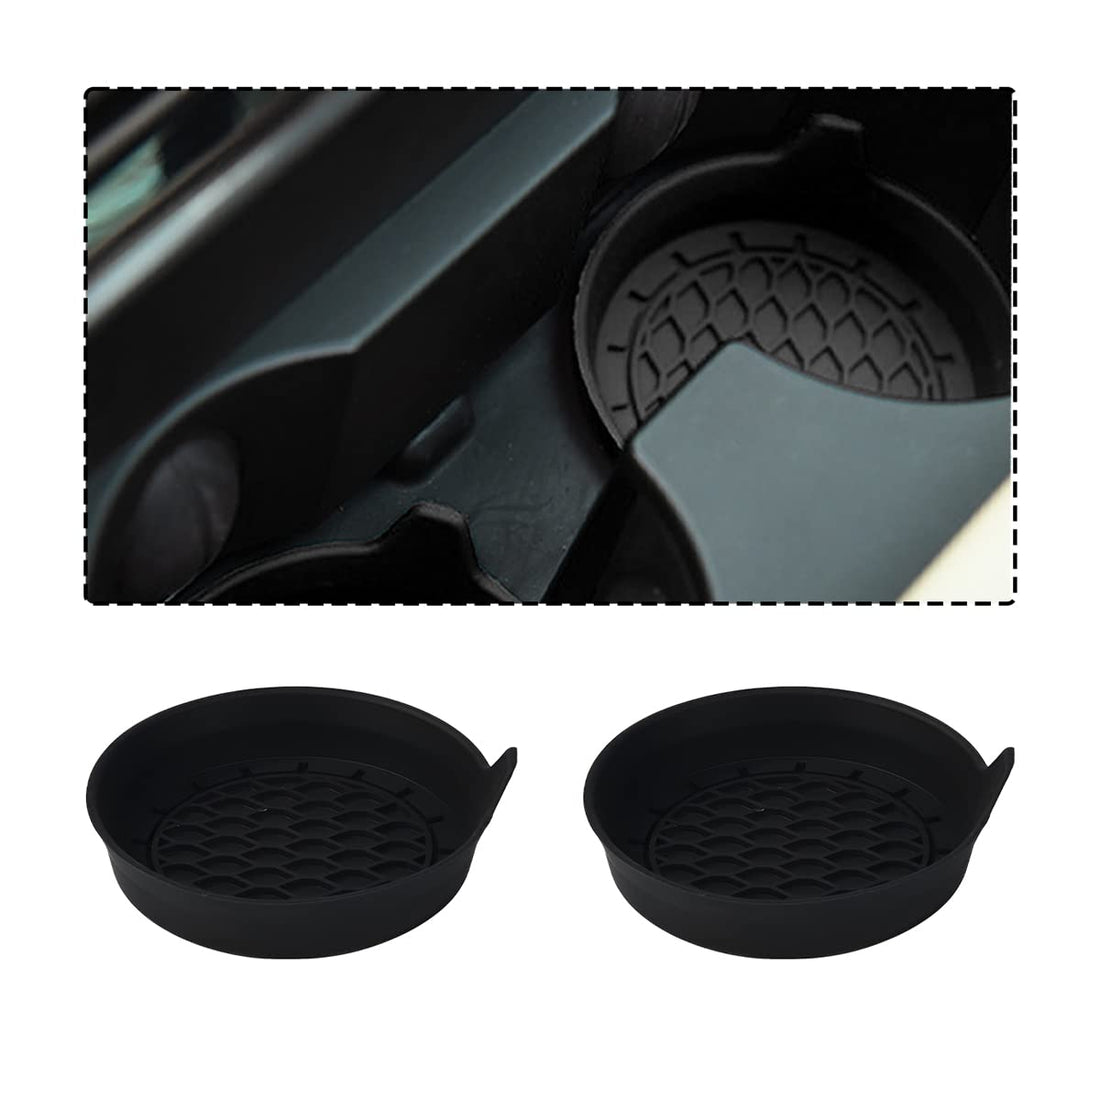 zipelo 2 Pack Cup Holder Coaster, 3.1" Silicone Insulation Drink Mat, Waterproof Non-Slip Sift-Proof Spill Holder, Universal Vehicle Interior Accessories Compatible with Most Cars and Trucks (Black)